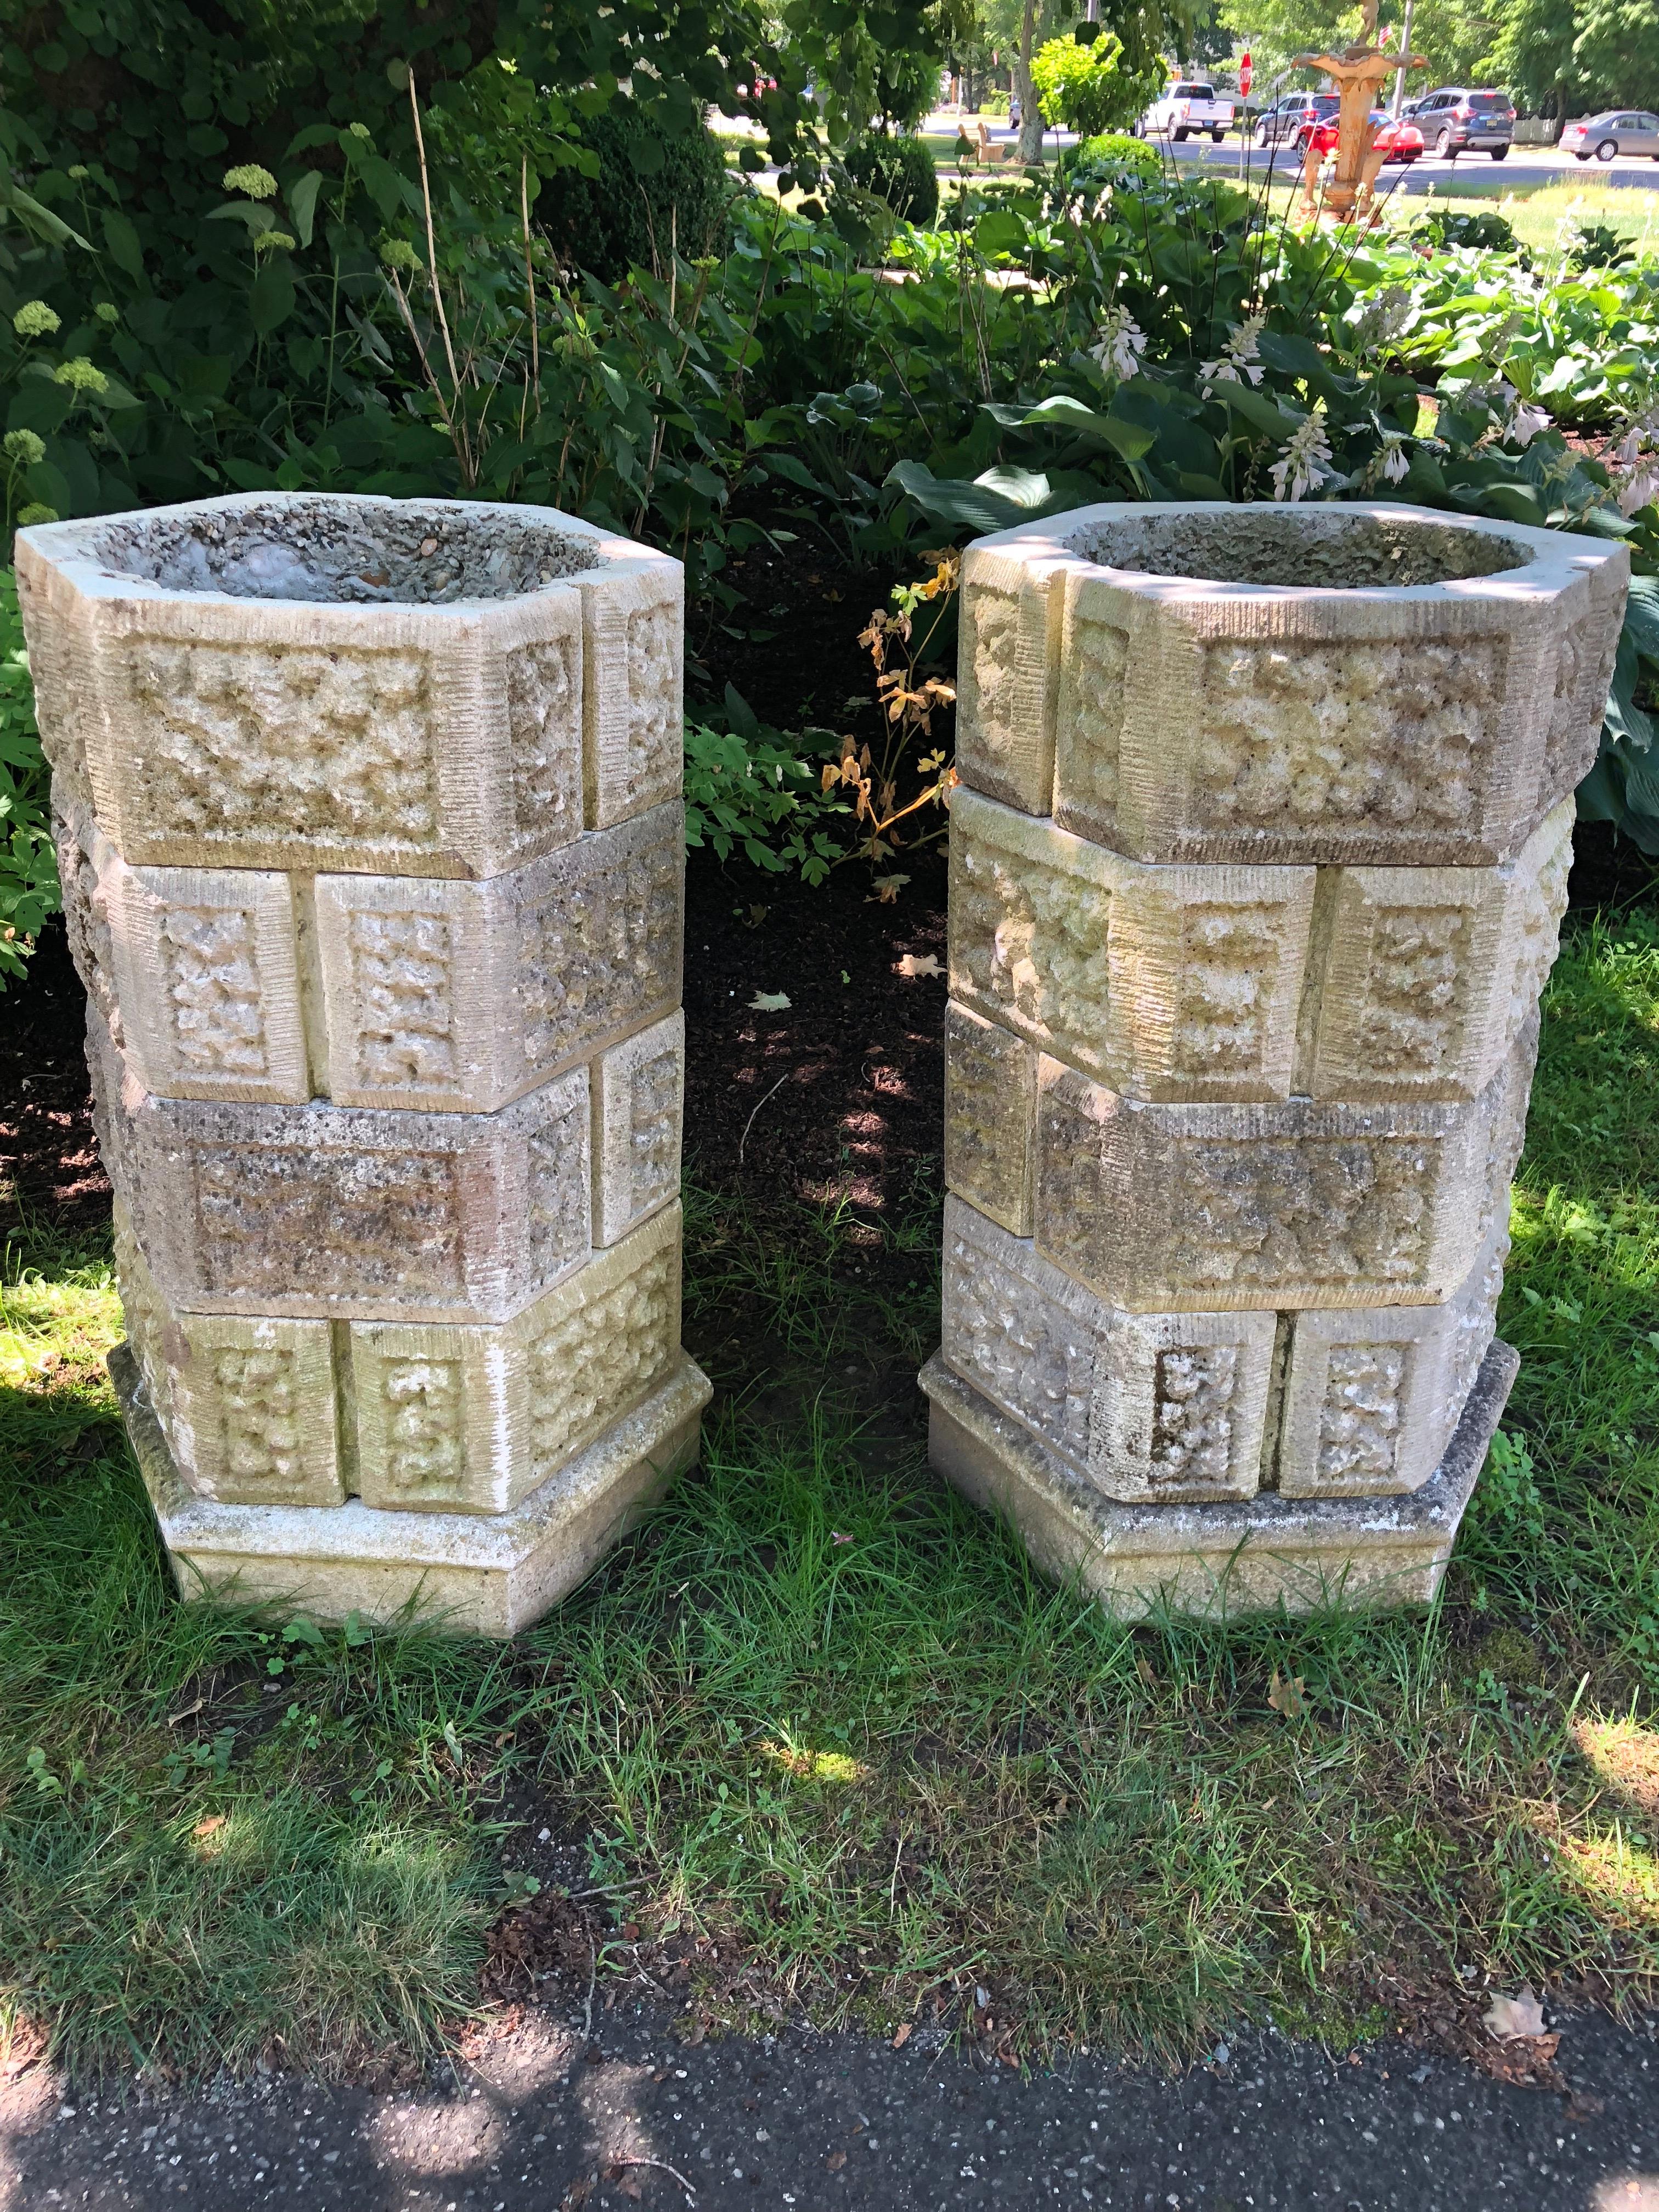 This pair of stackable cast stone planters has five tiers so you can use all five or remove one or two to achieve your desired height. Unusual in form and style, they would be the perfect accompaniment to a Tudor or Gothic Revival home or garden.